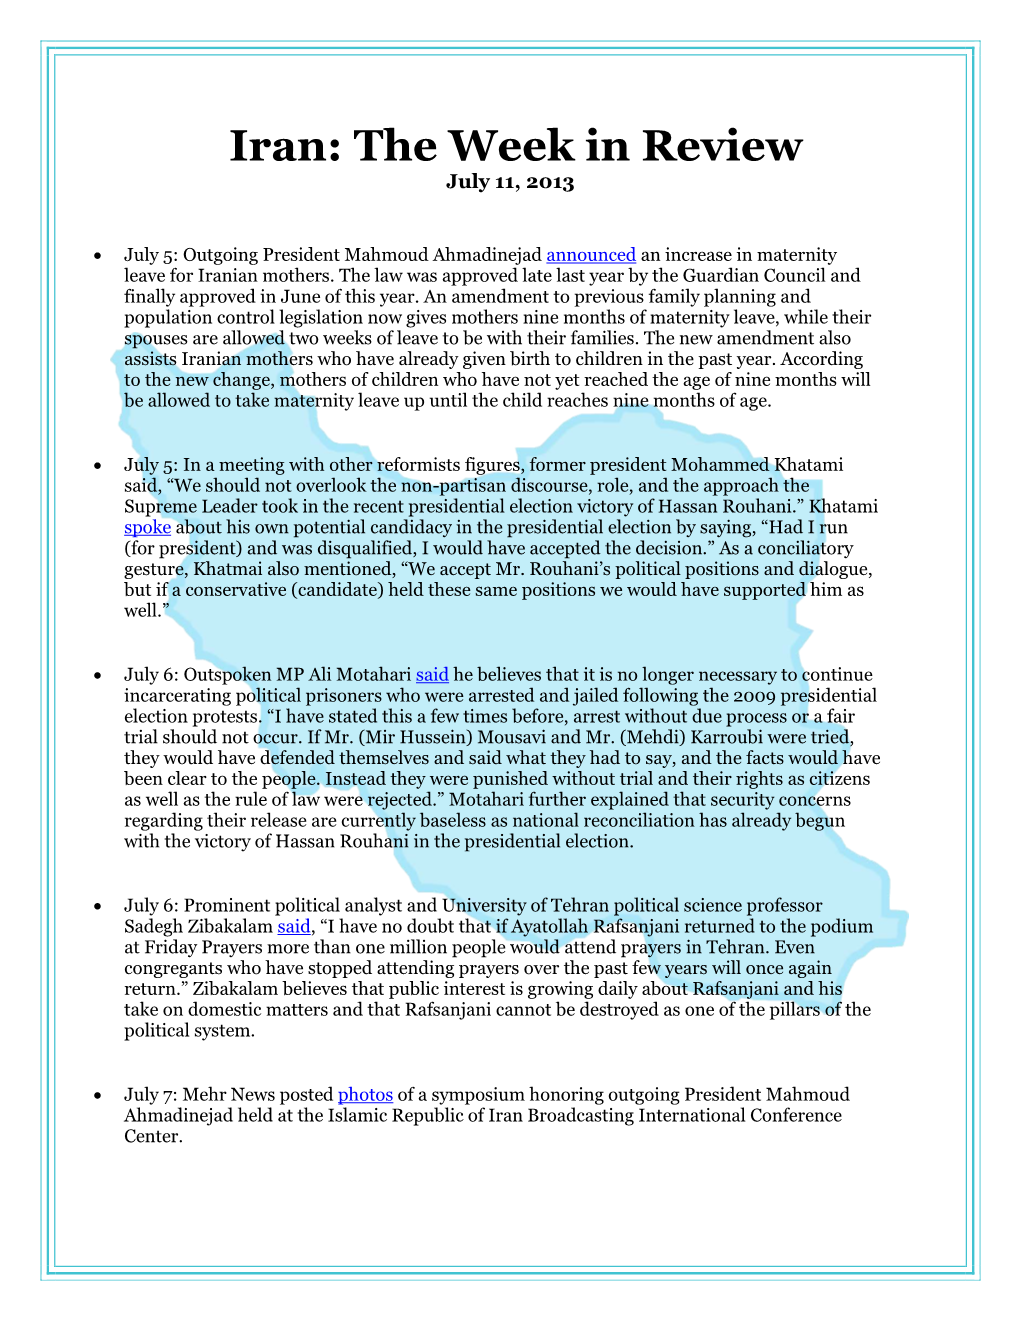 Iran: the Week in Review July 11, 2013